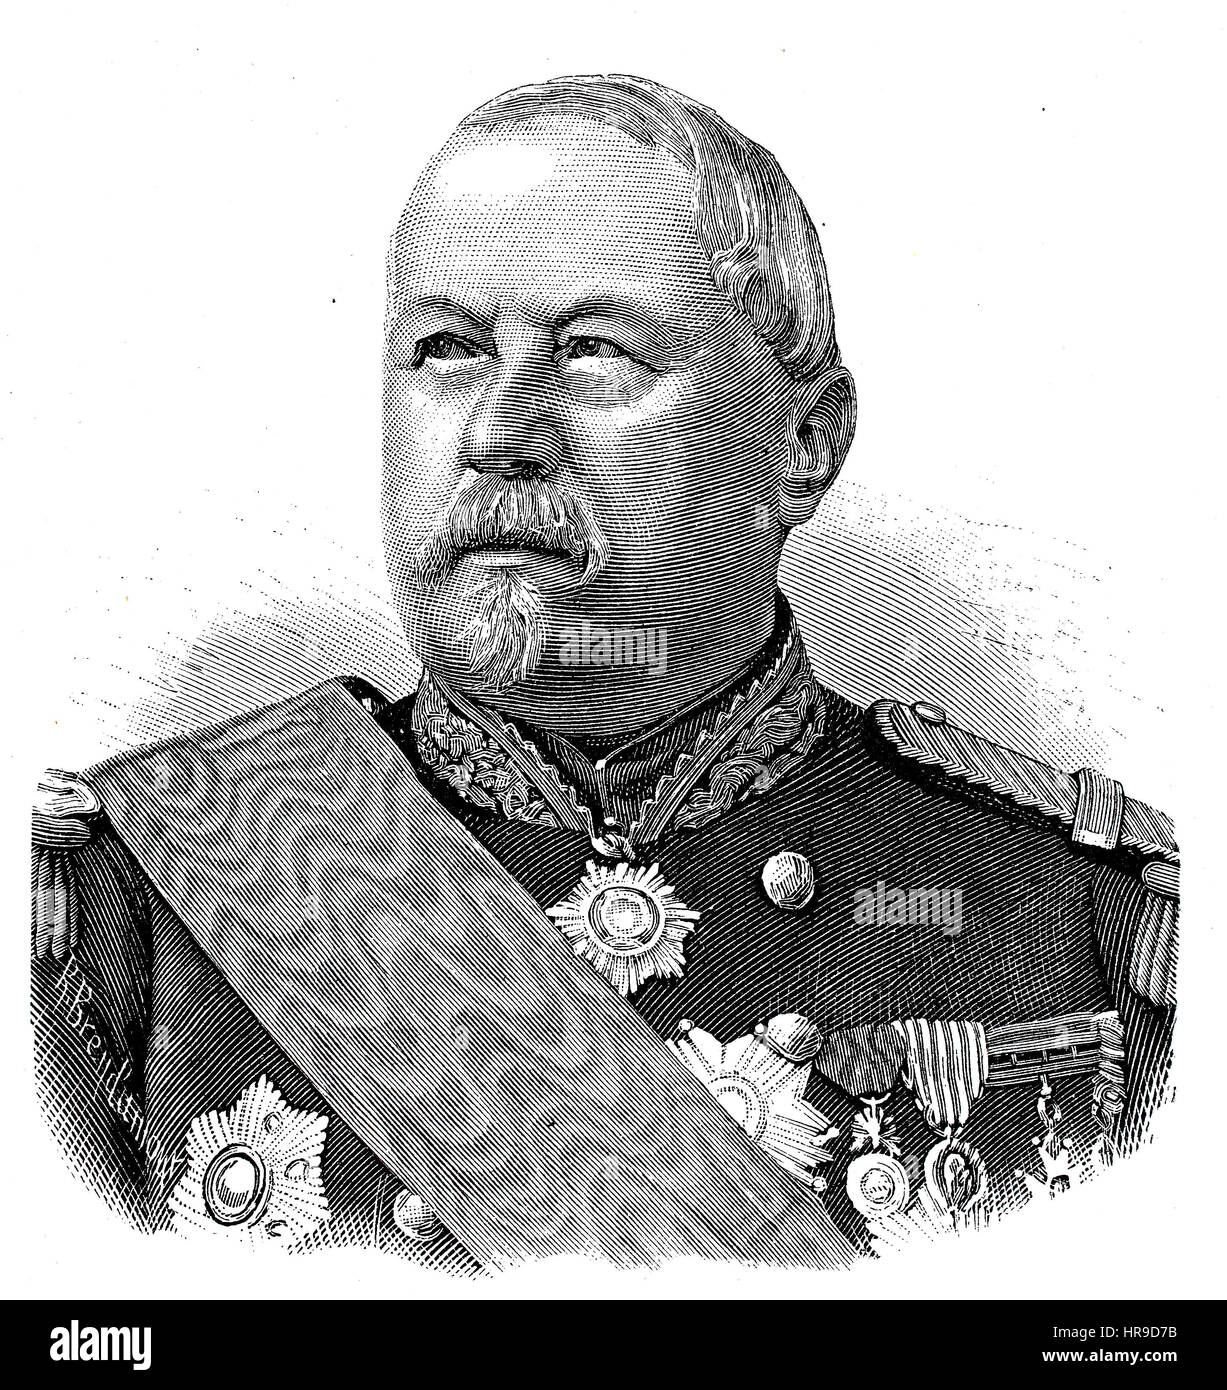 Joseph Vinoy, 1803 - 1880, Was a French general and senator, Situation from the time of The Franco-Prussian War or Franco-German War,  Deutsch-Franzoesischer Krieg, 1870-1871, Reproduction of an original woodcut from the year 1885, digital improved Stock Photo